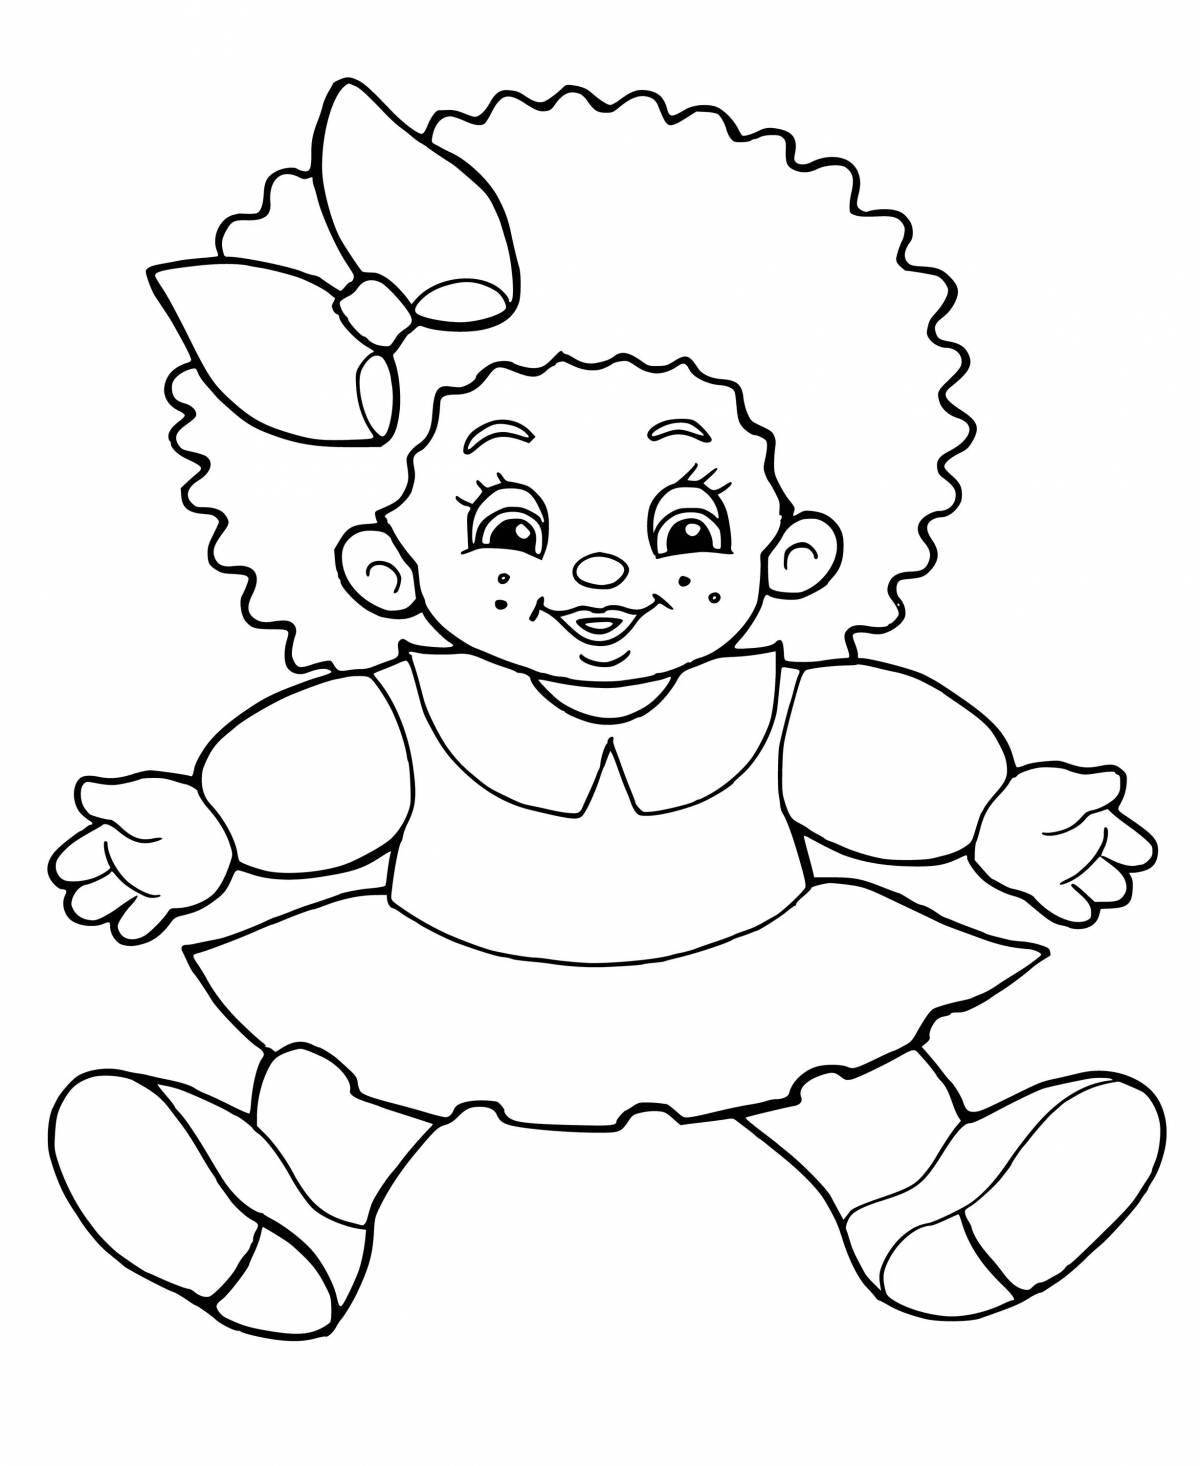 Bright doll coloring for children 2-3 years old